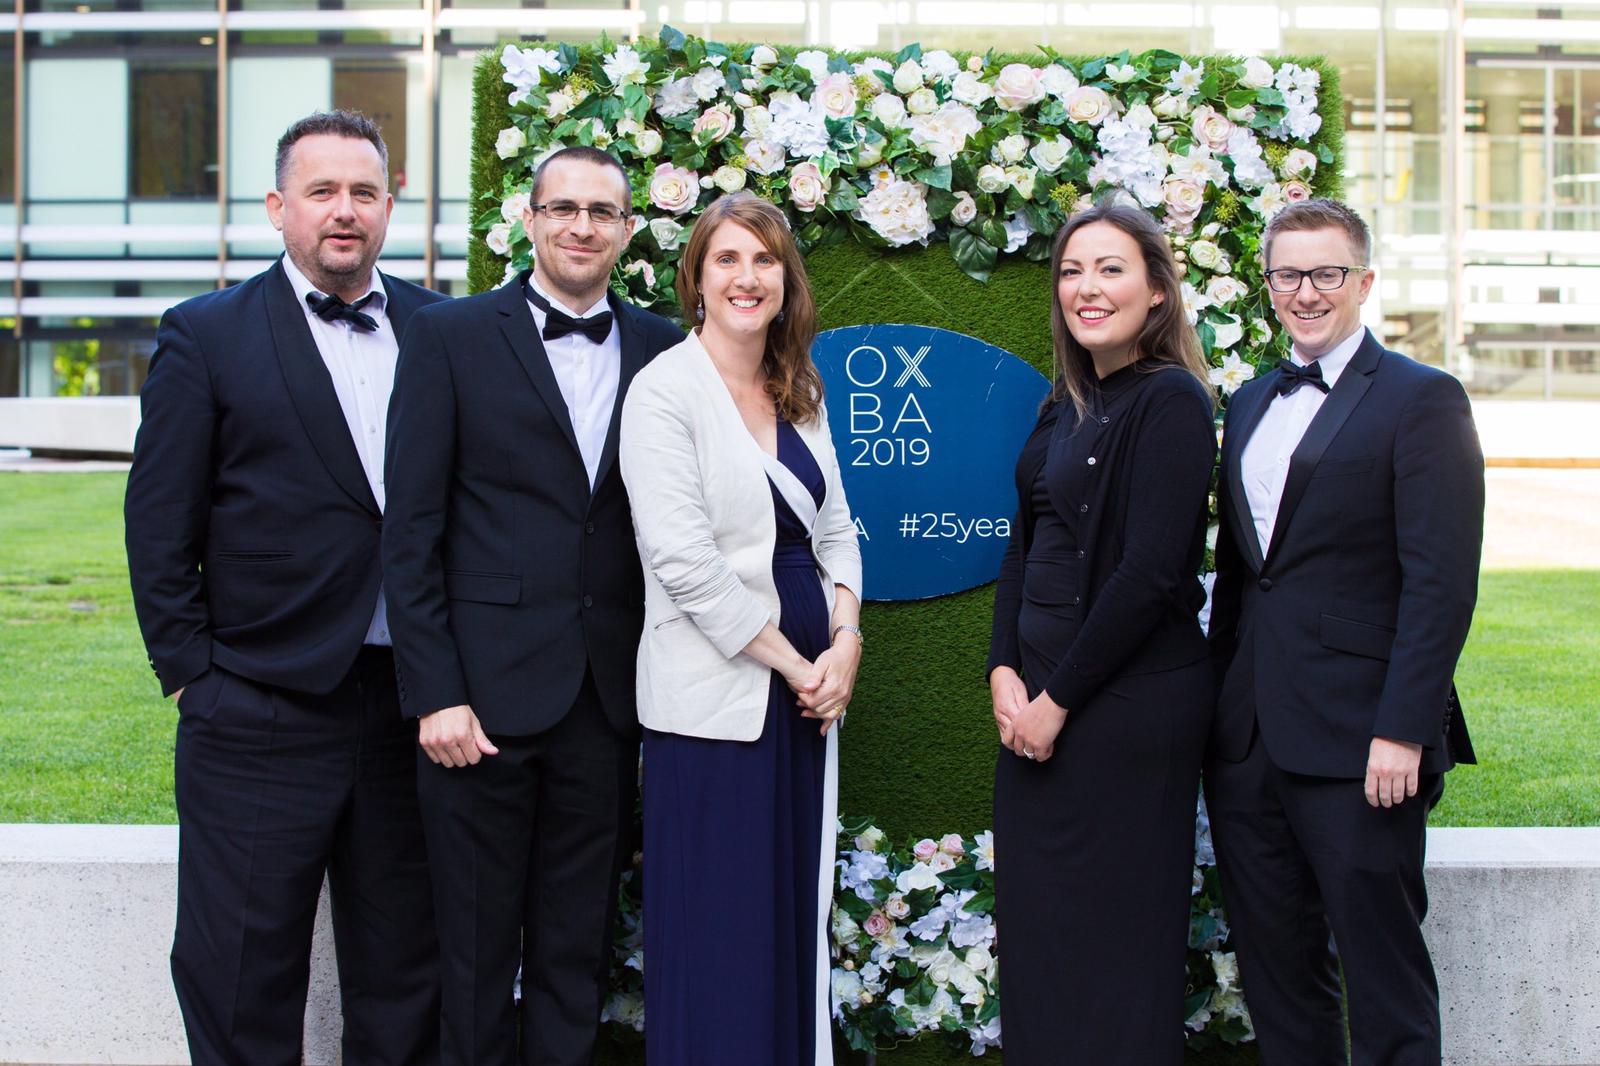 SWJ Consulting finalists at the Oxfordshire Business Awards 2019